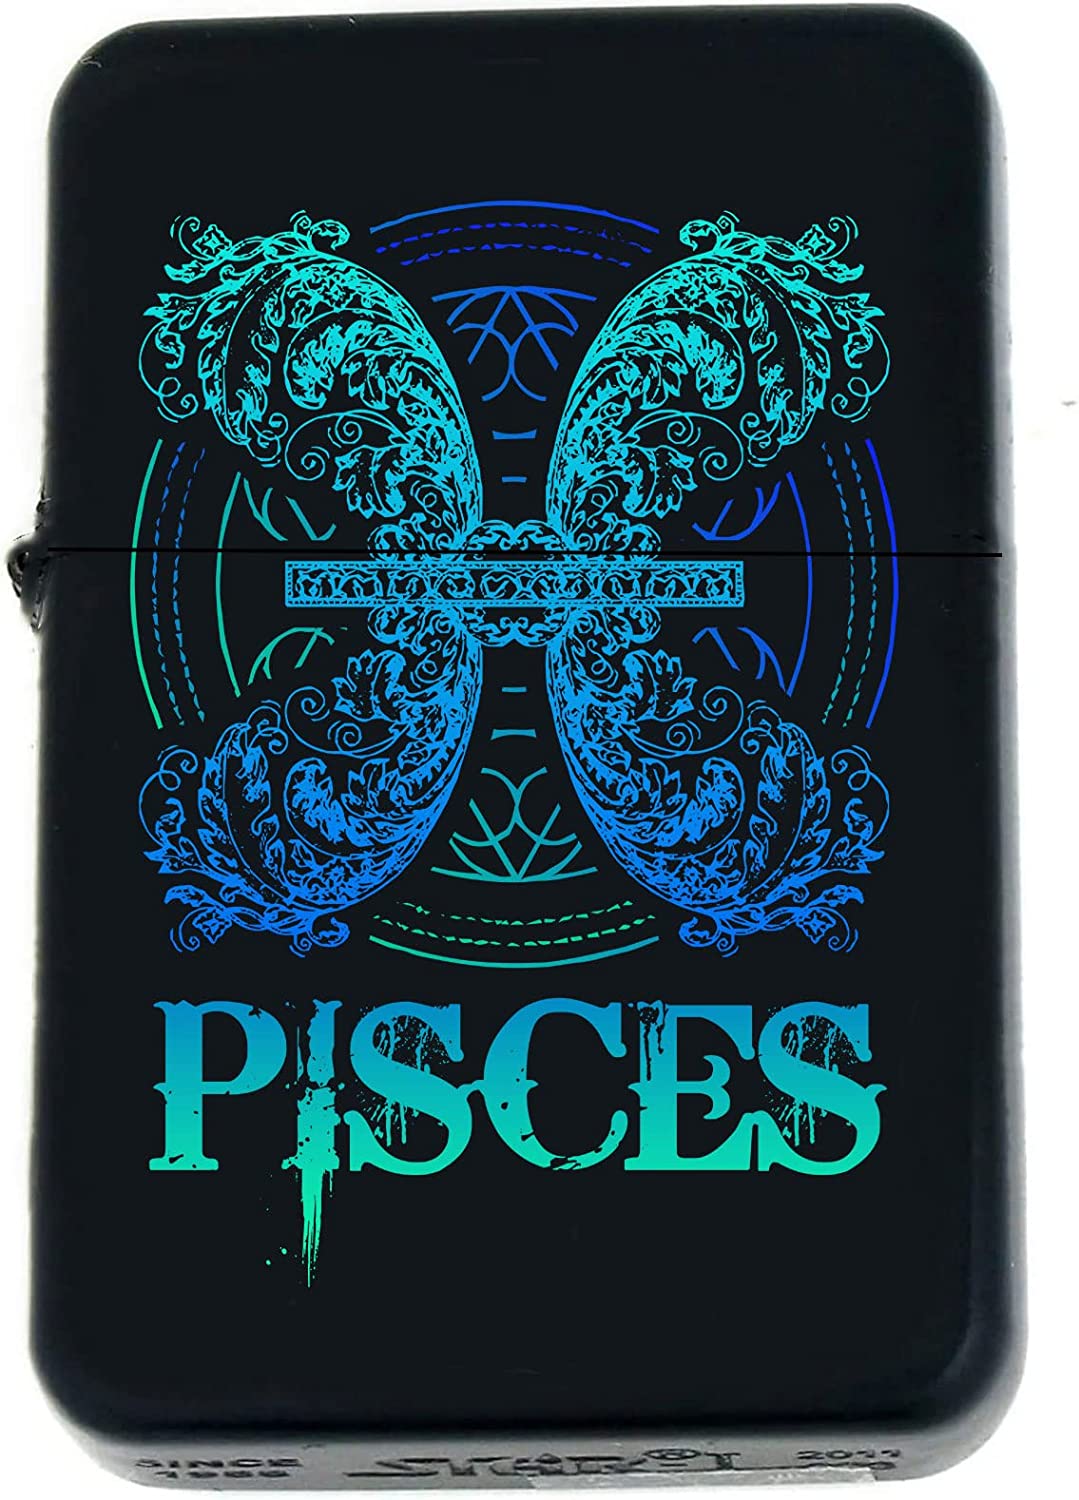 GIFTS INFINITY-Personalized Birthday Zodiac Signs Windproof Lighters-Black Matt (Pisces)